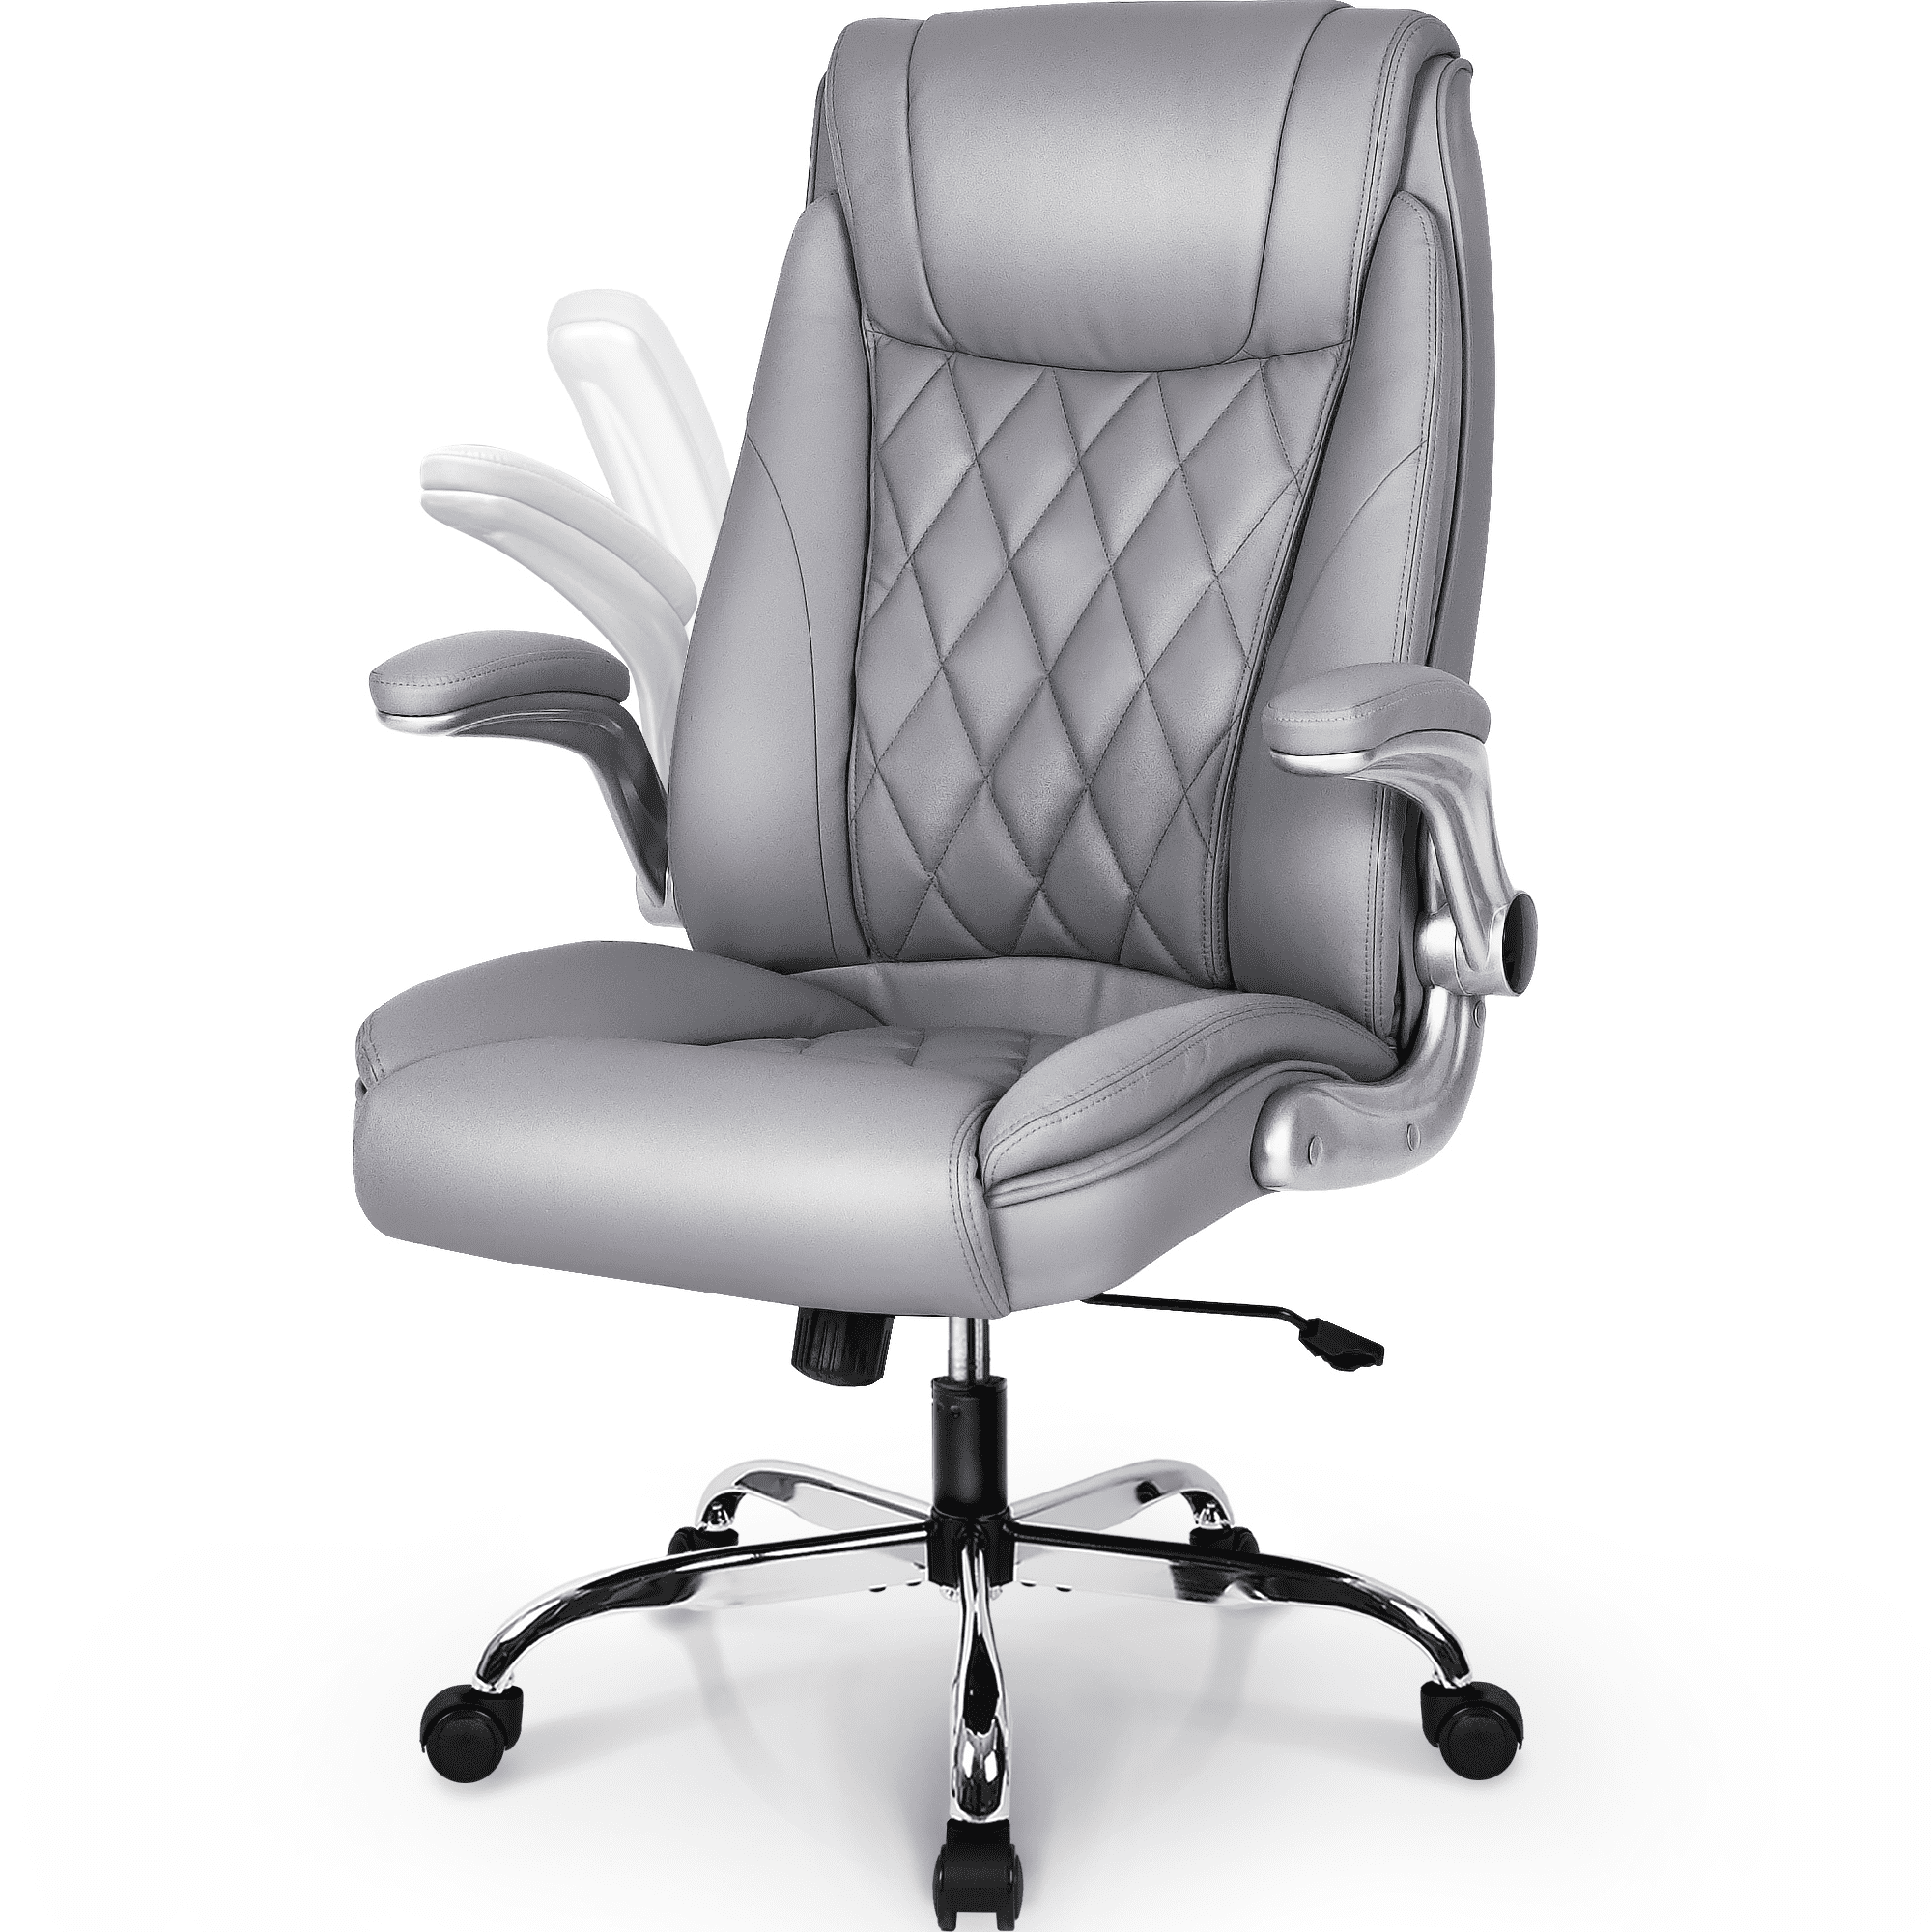 Executive High Back Leather Office Chair Swivel Computer Task Desk Boss Seat R0 